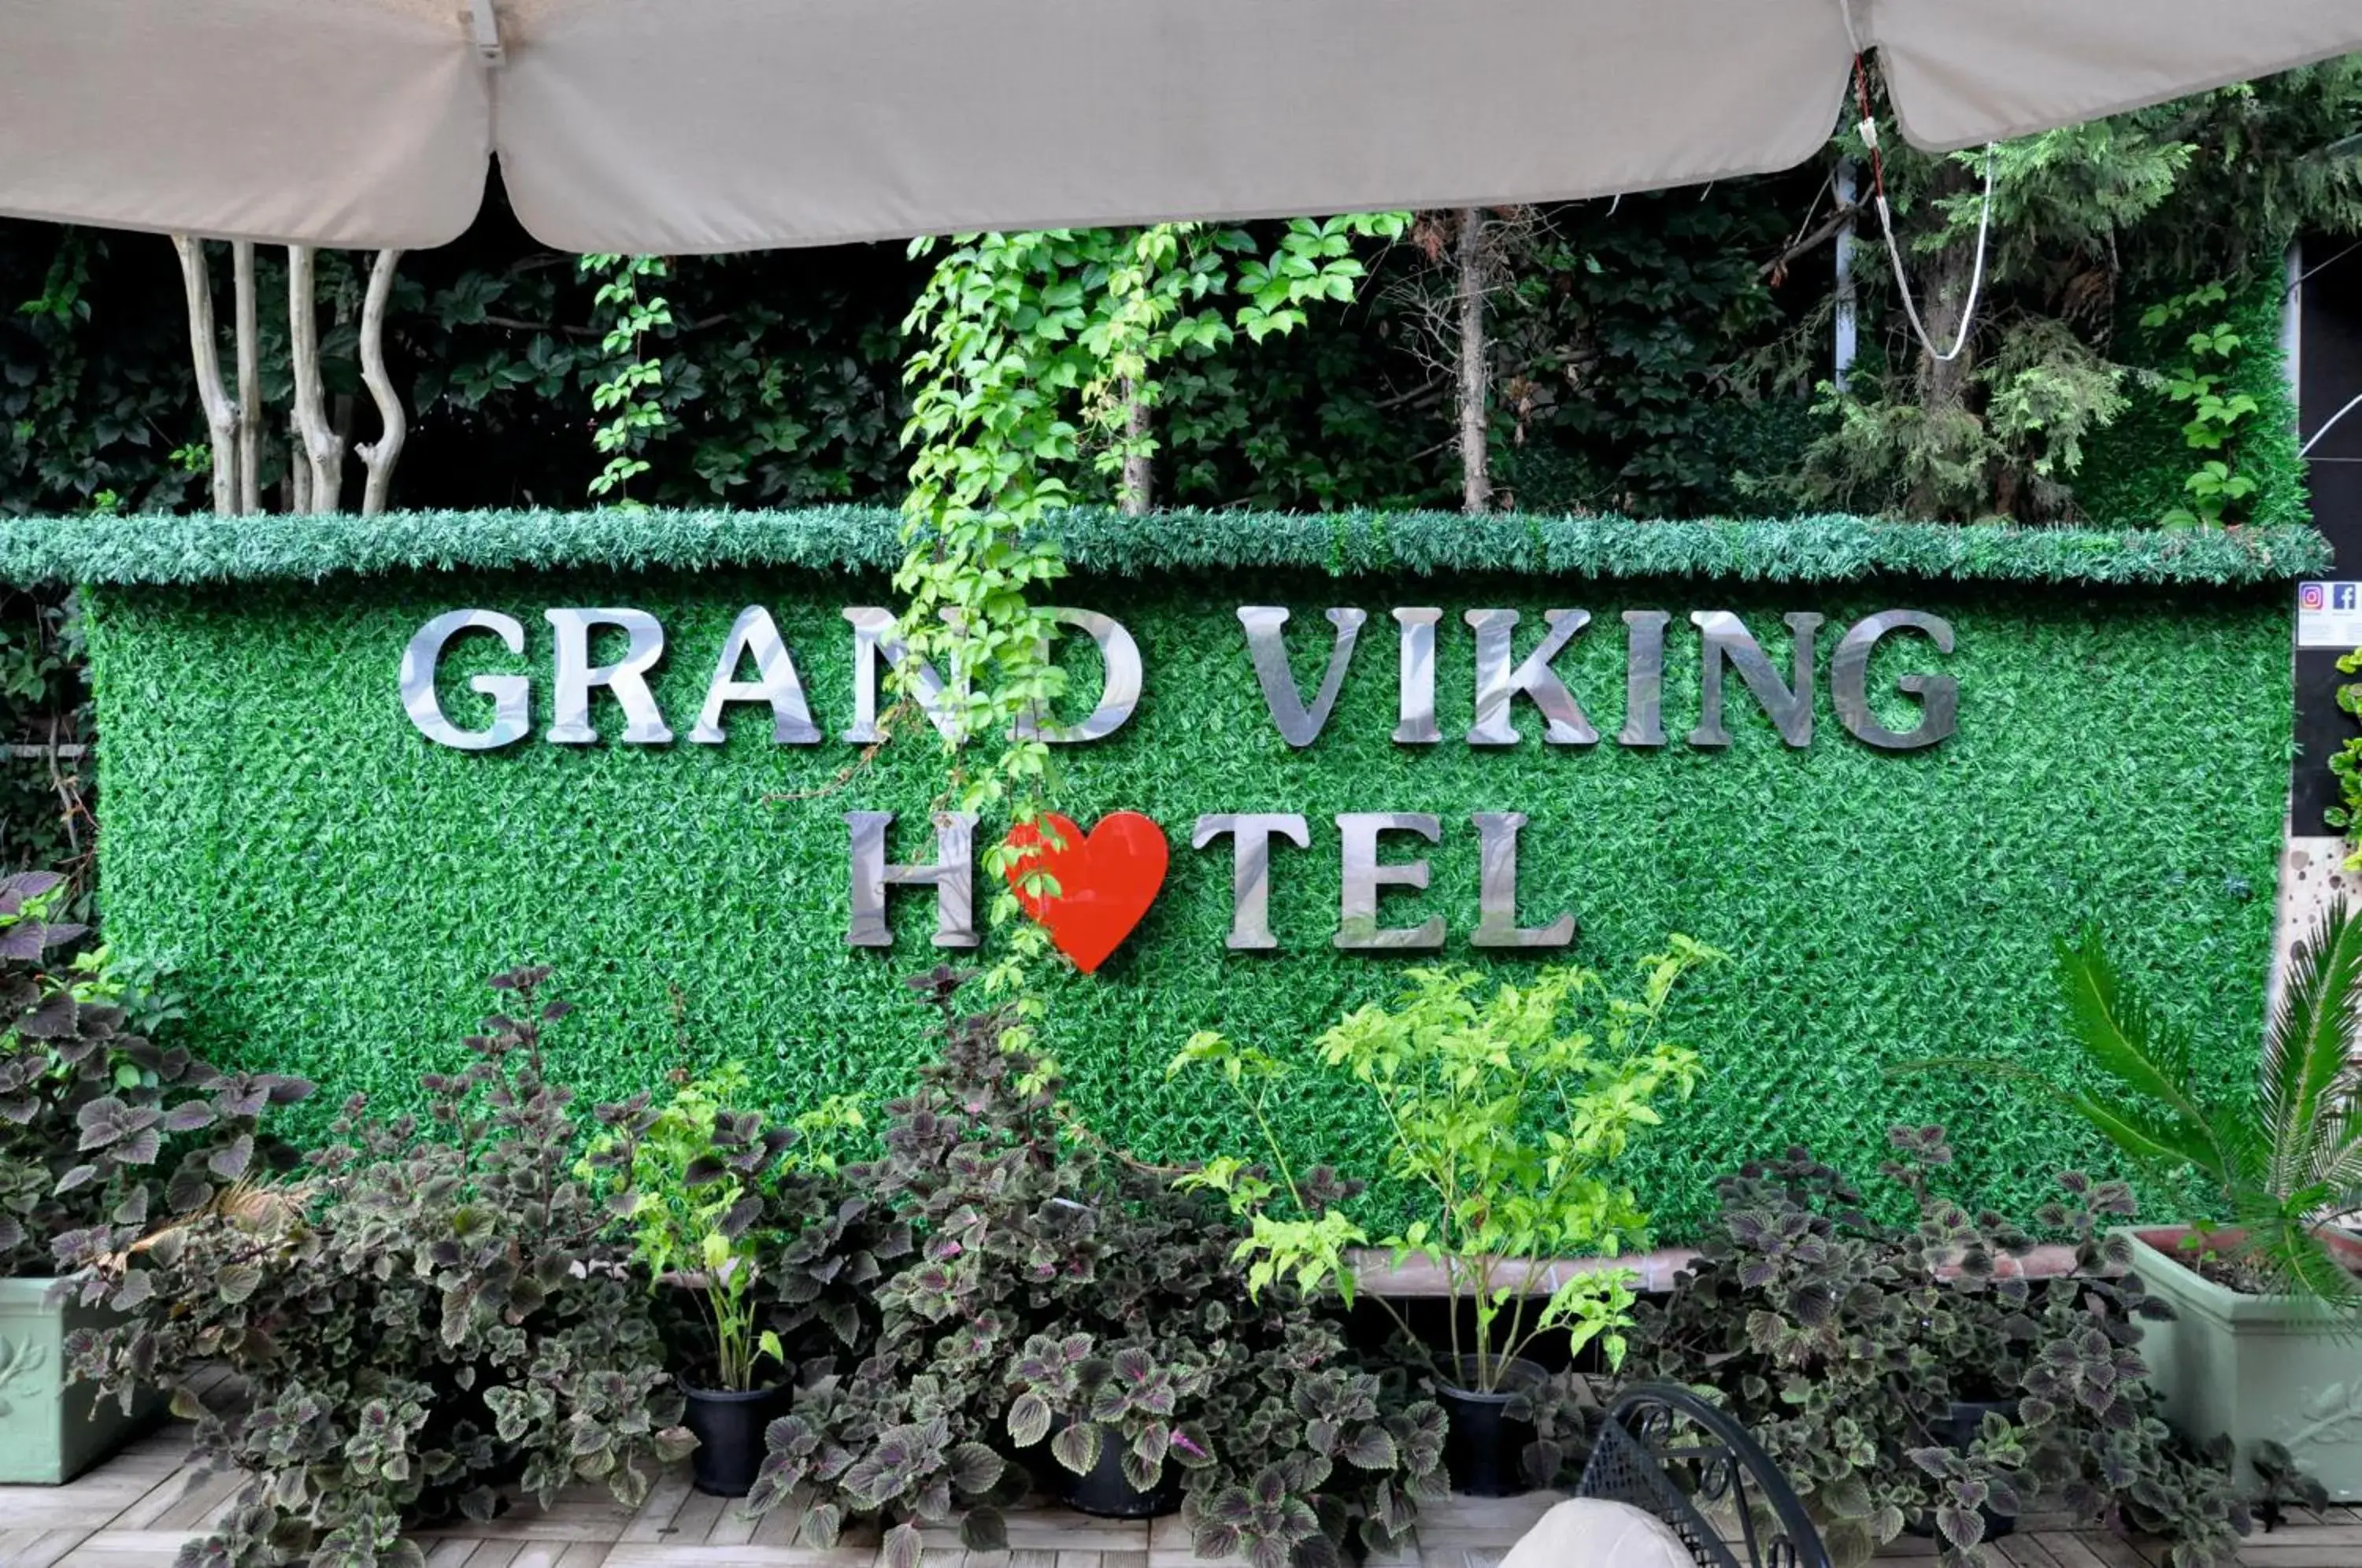 Property building in Grand Viking Hotel